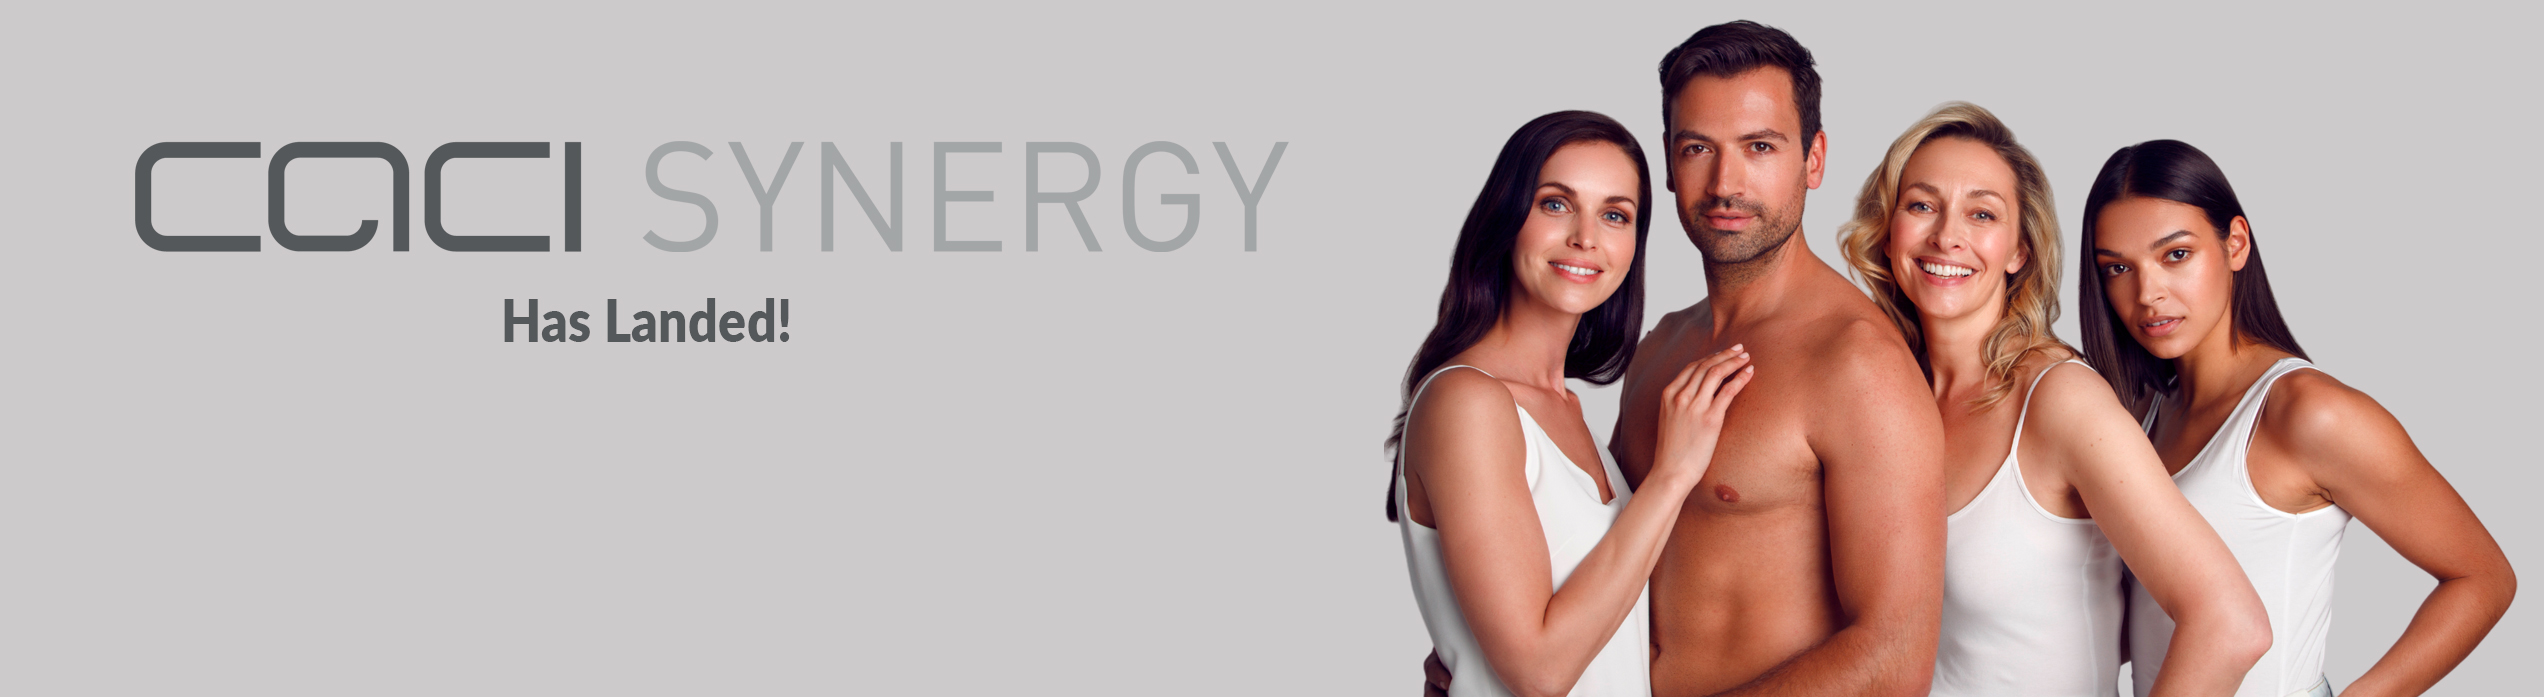 Caci Synergy Has Landed banner